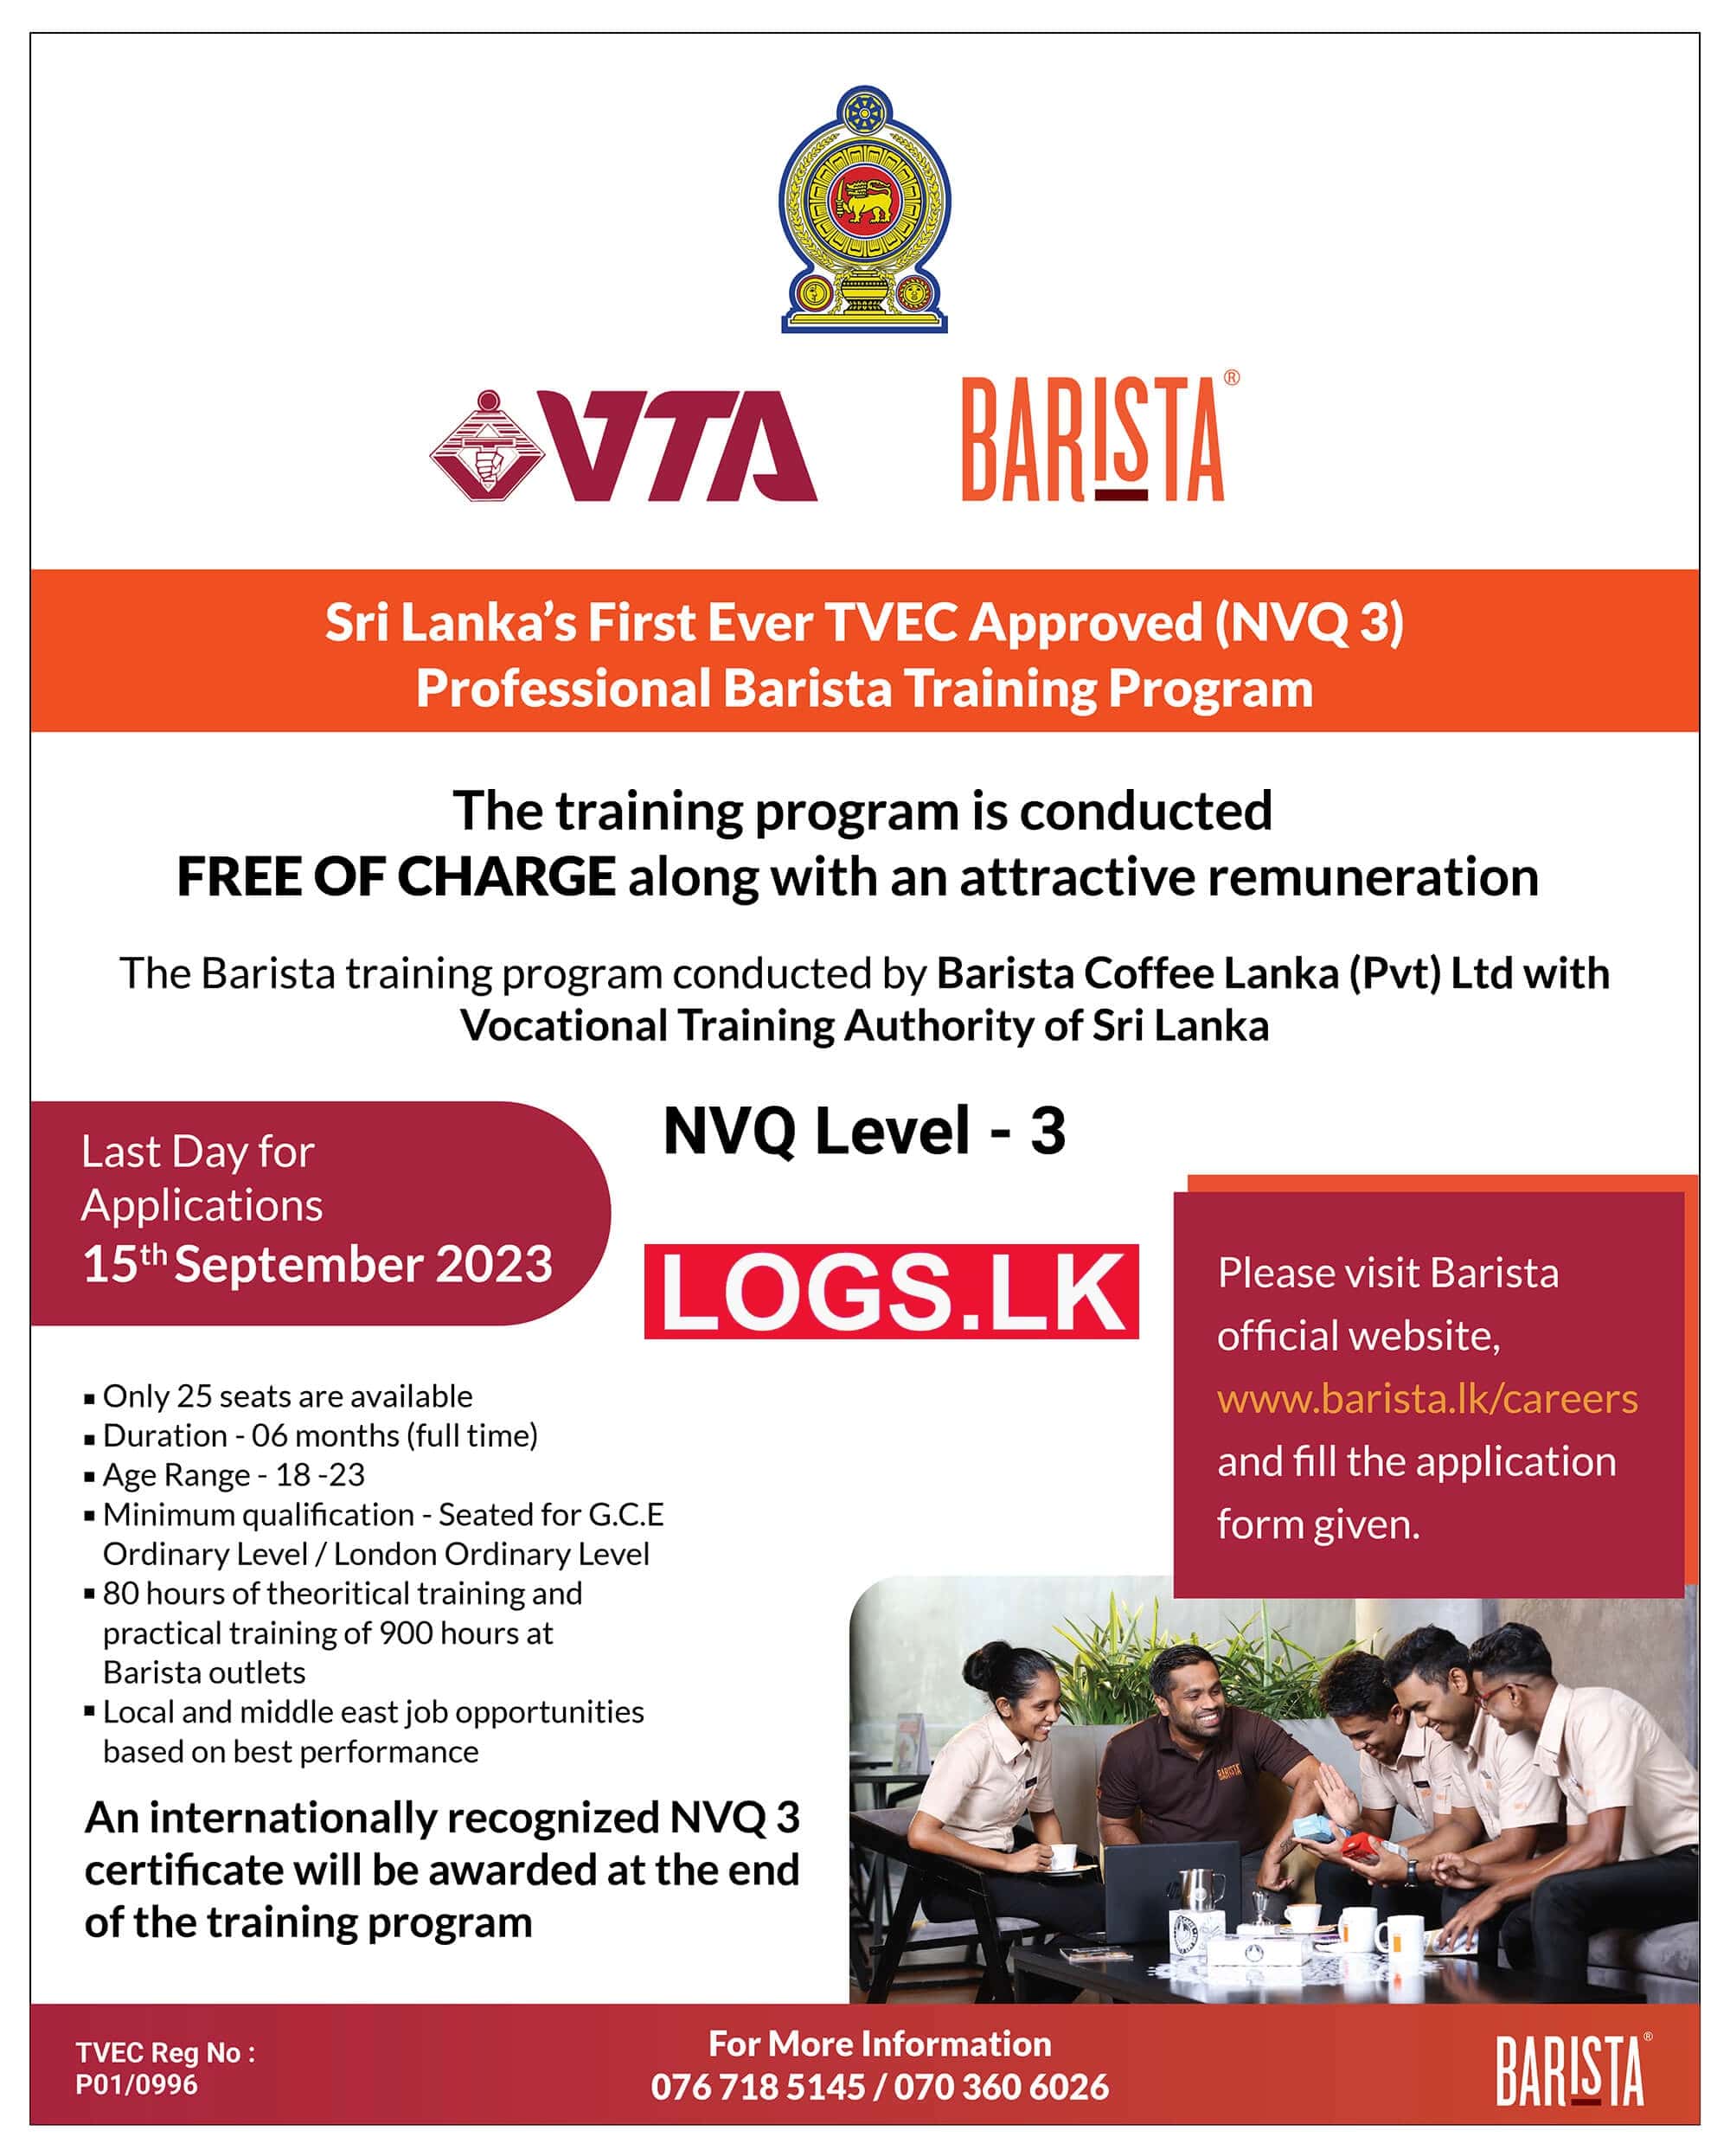 Barista Training Course 2023 by VTA & Barista Coffe Lanka Application Form, Details Download